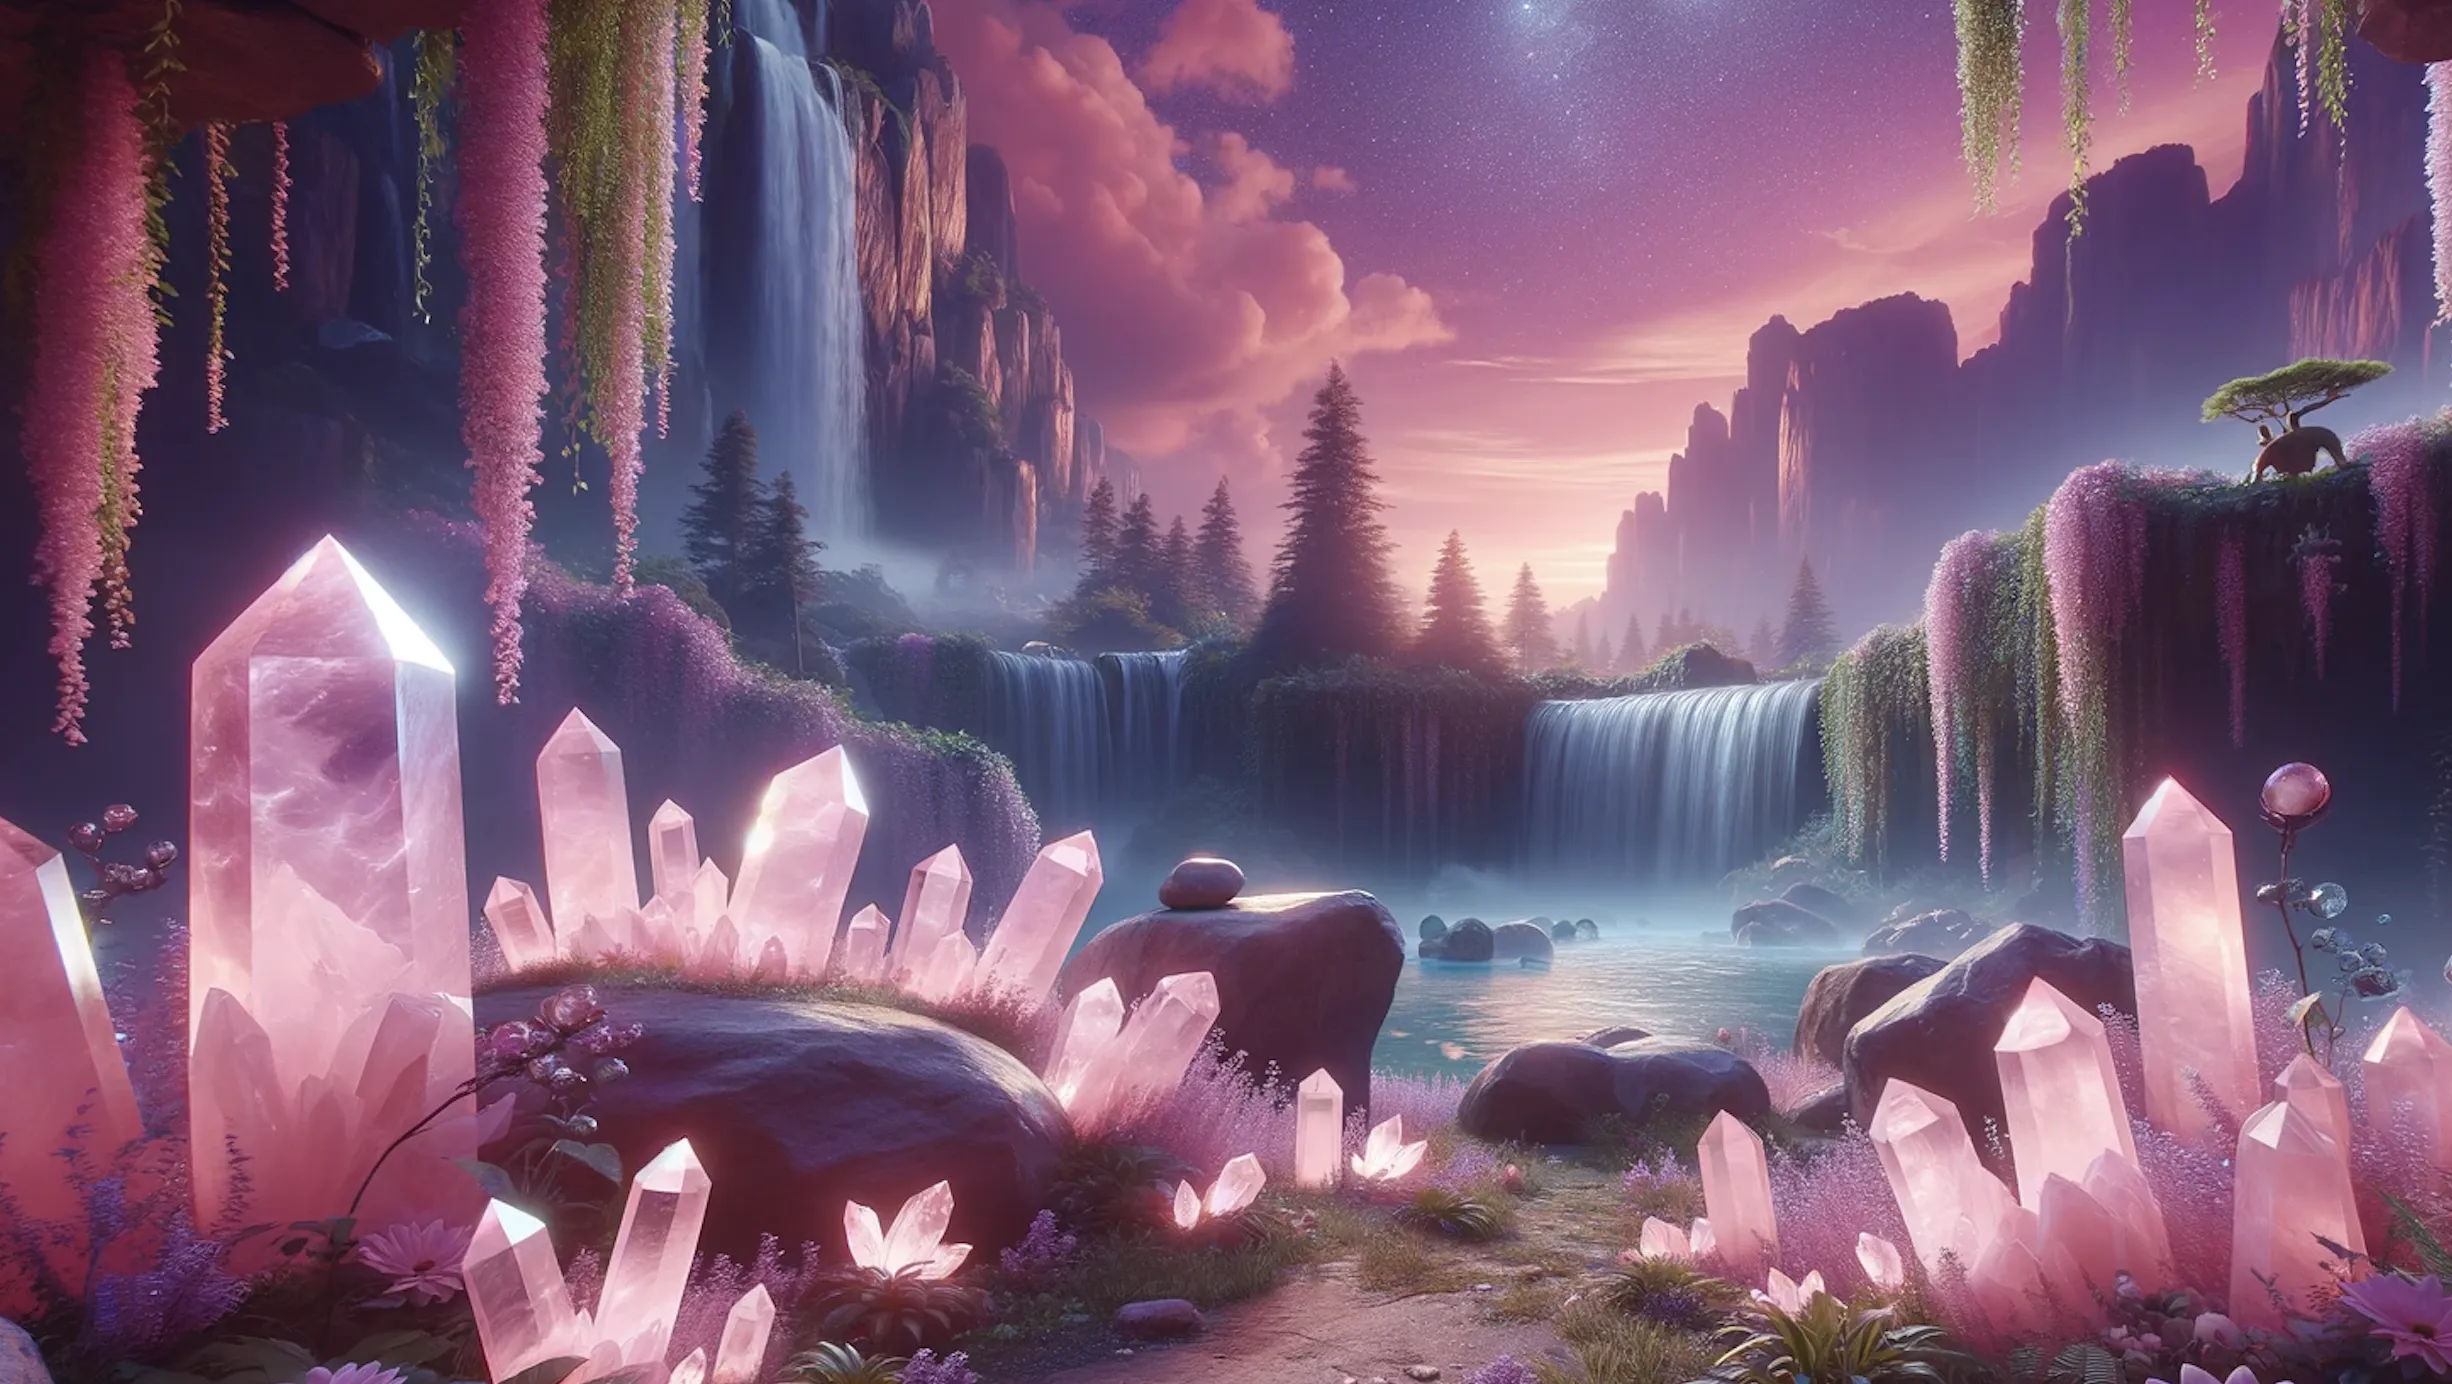 imaginary world with rose quartz crystals and waterfalls